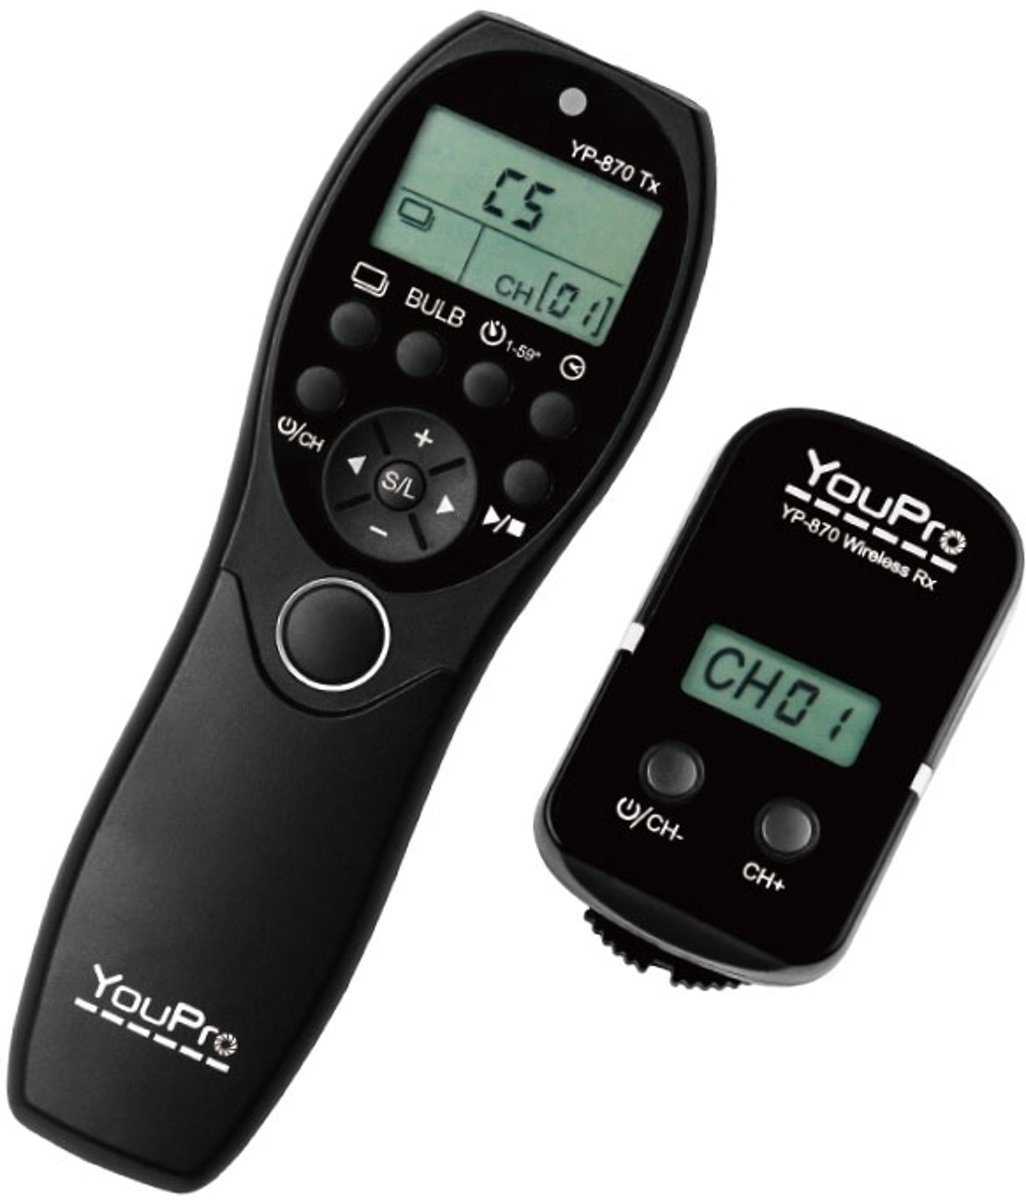 Canon 70D Draadloze Luxe Timer Afstandsbediening / YouPro Camera Remote type YP-870II E3